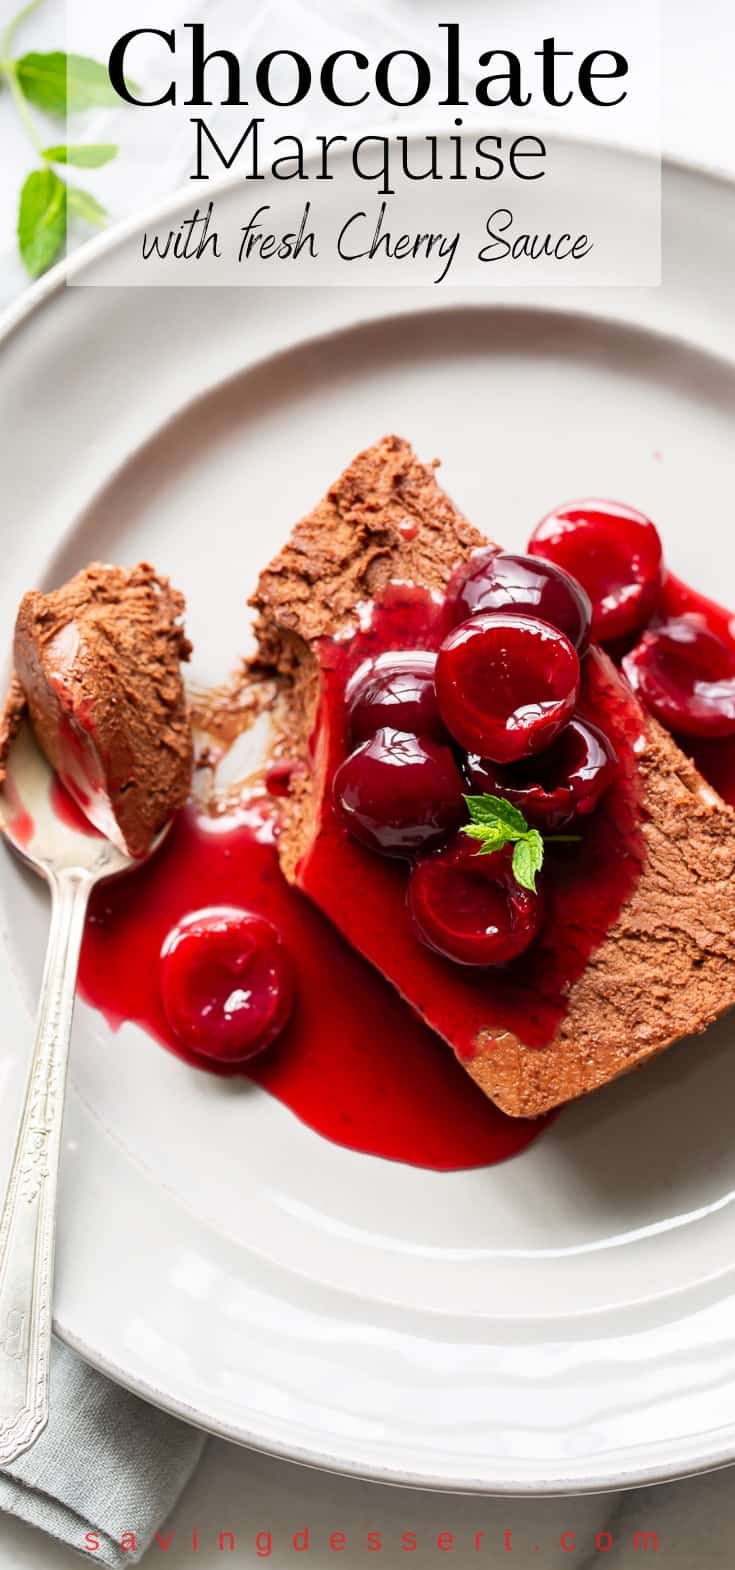 A plate with a slice of chocolate semifreddo topped with fresh cherry sauce